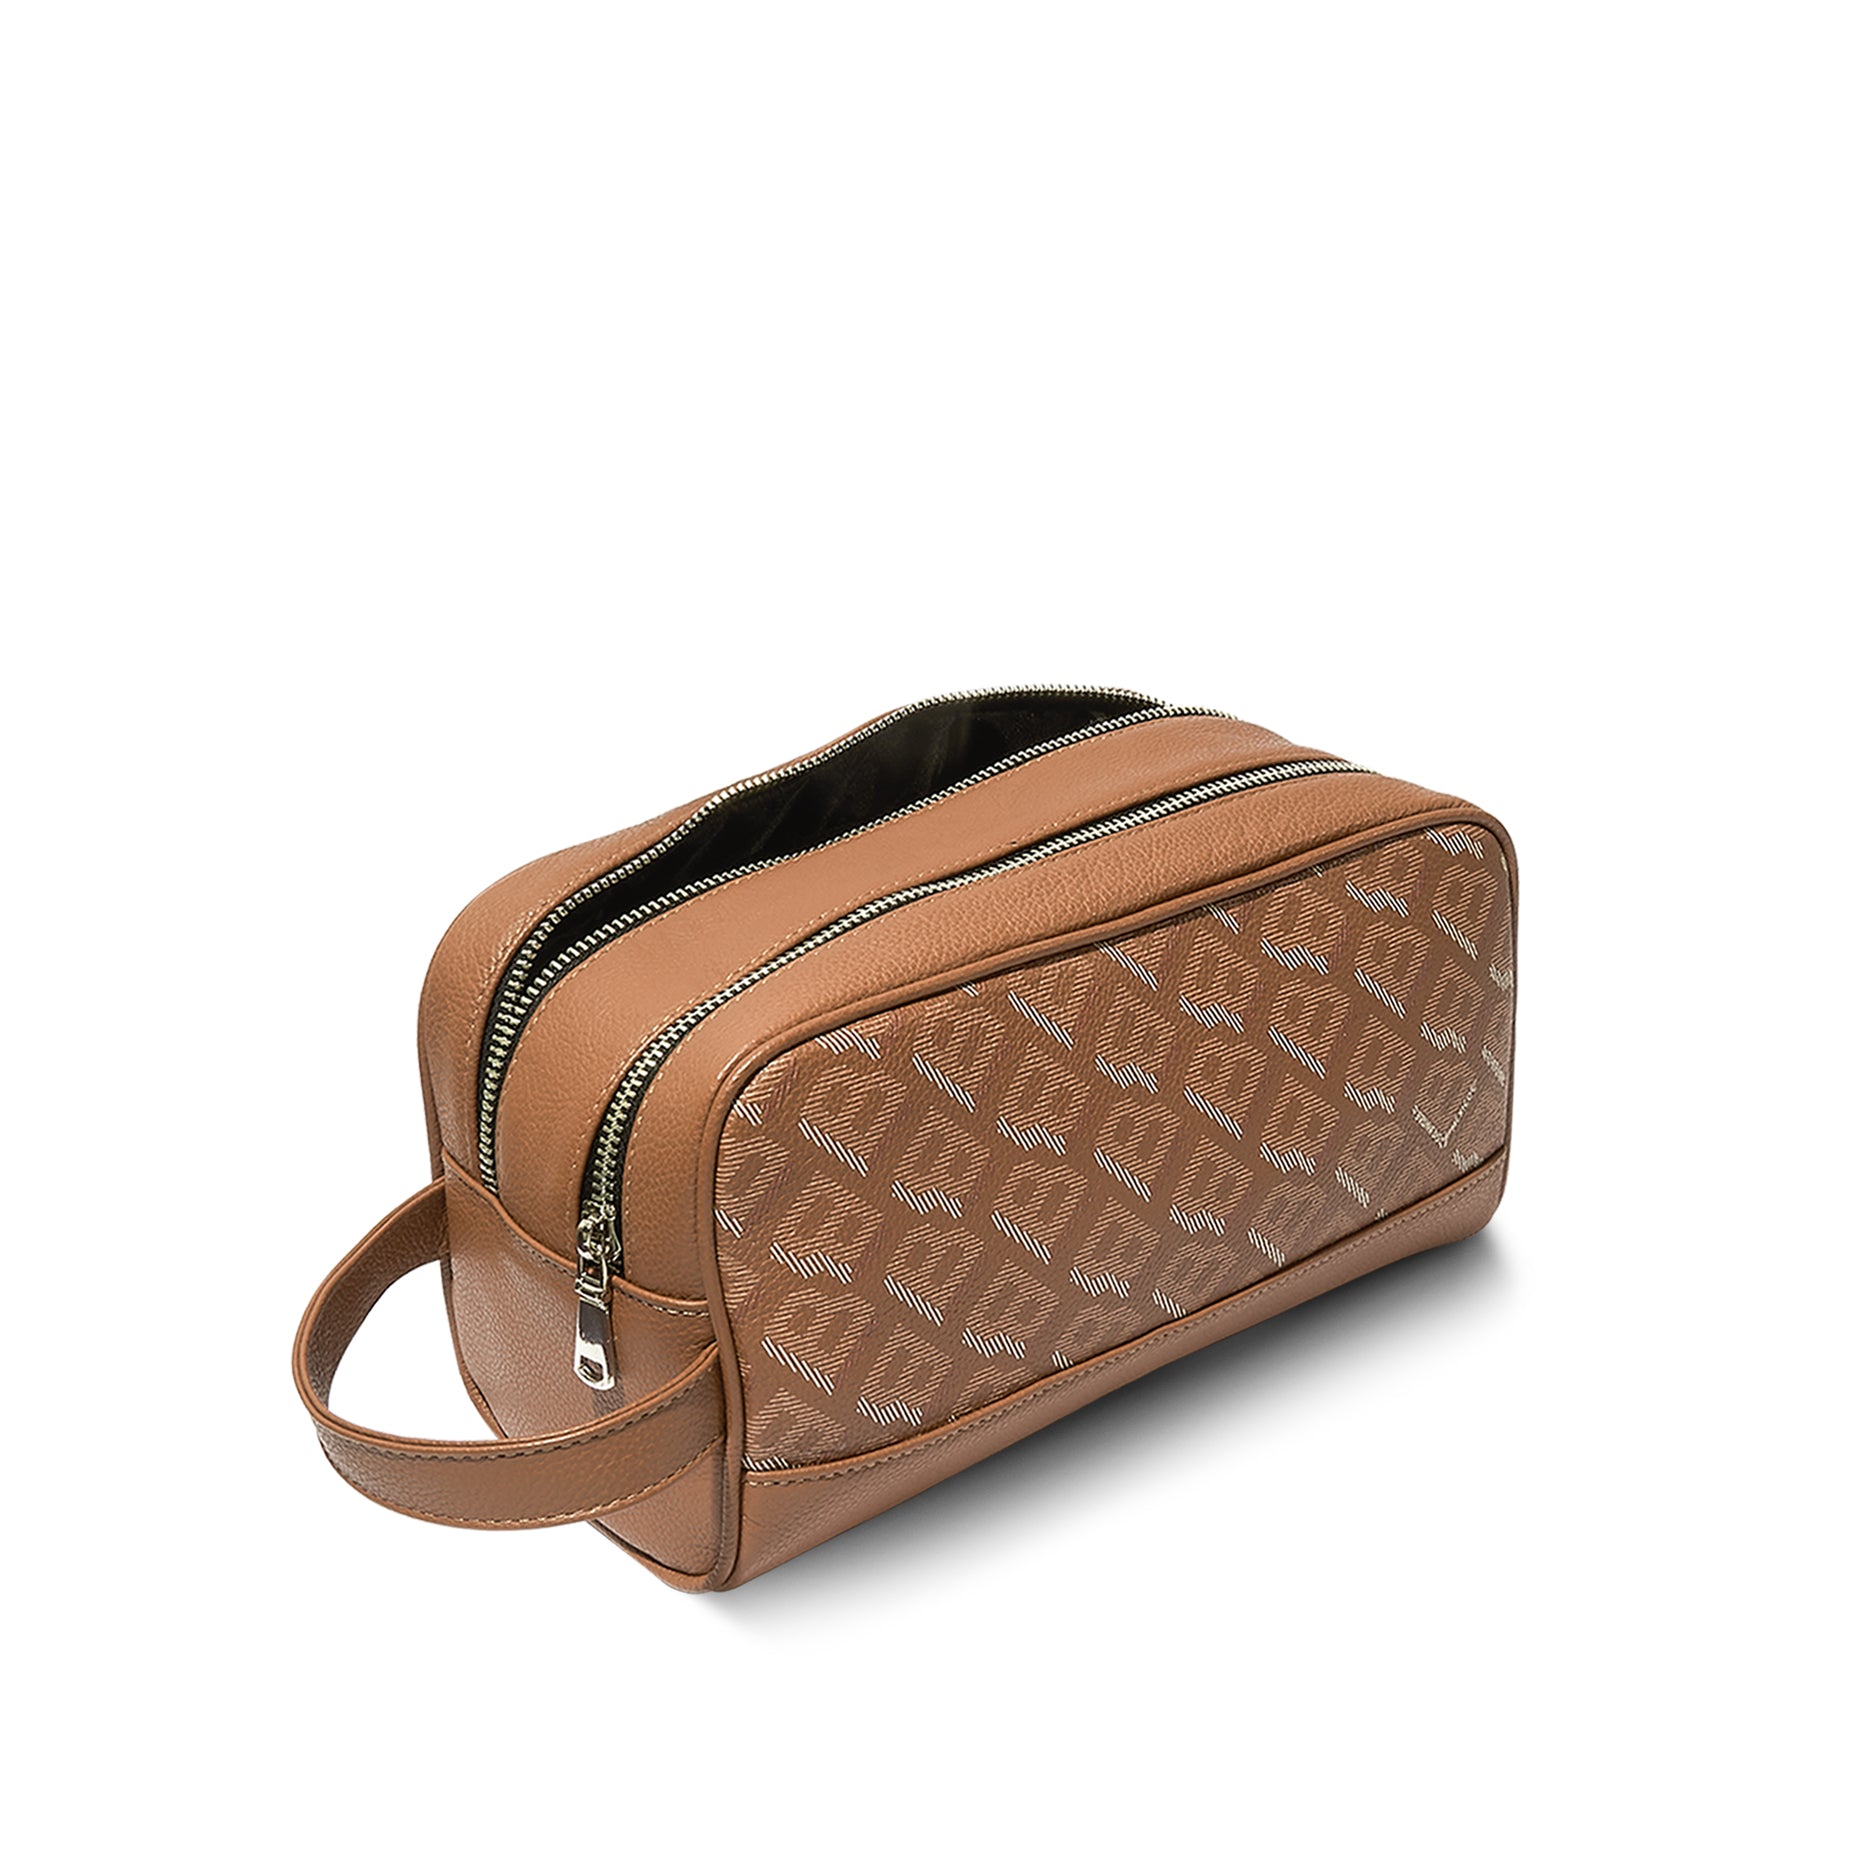 Toiletry bag - The Signature - Camel